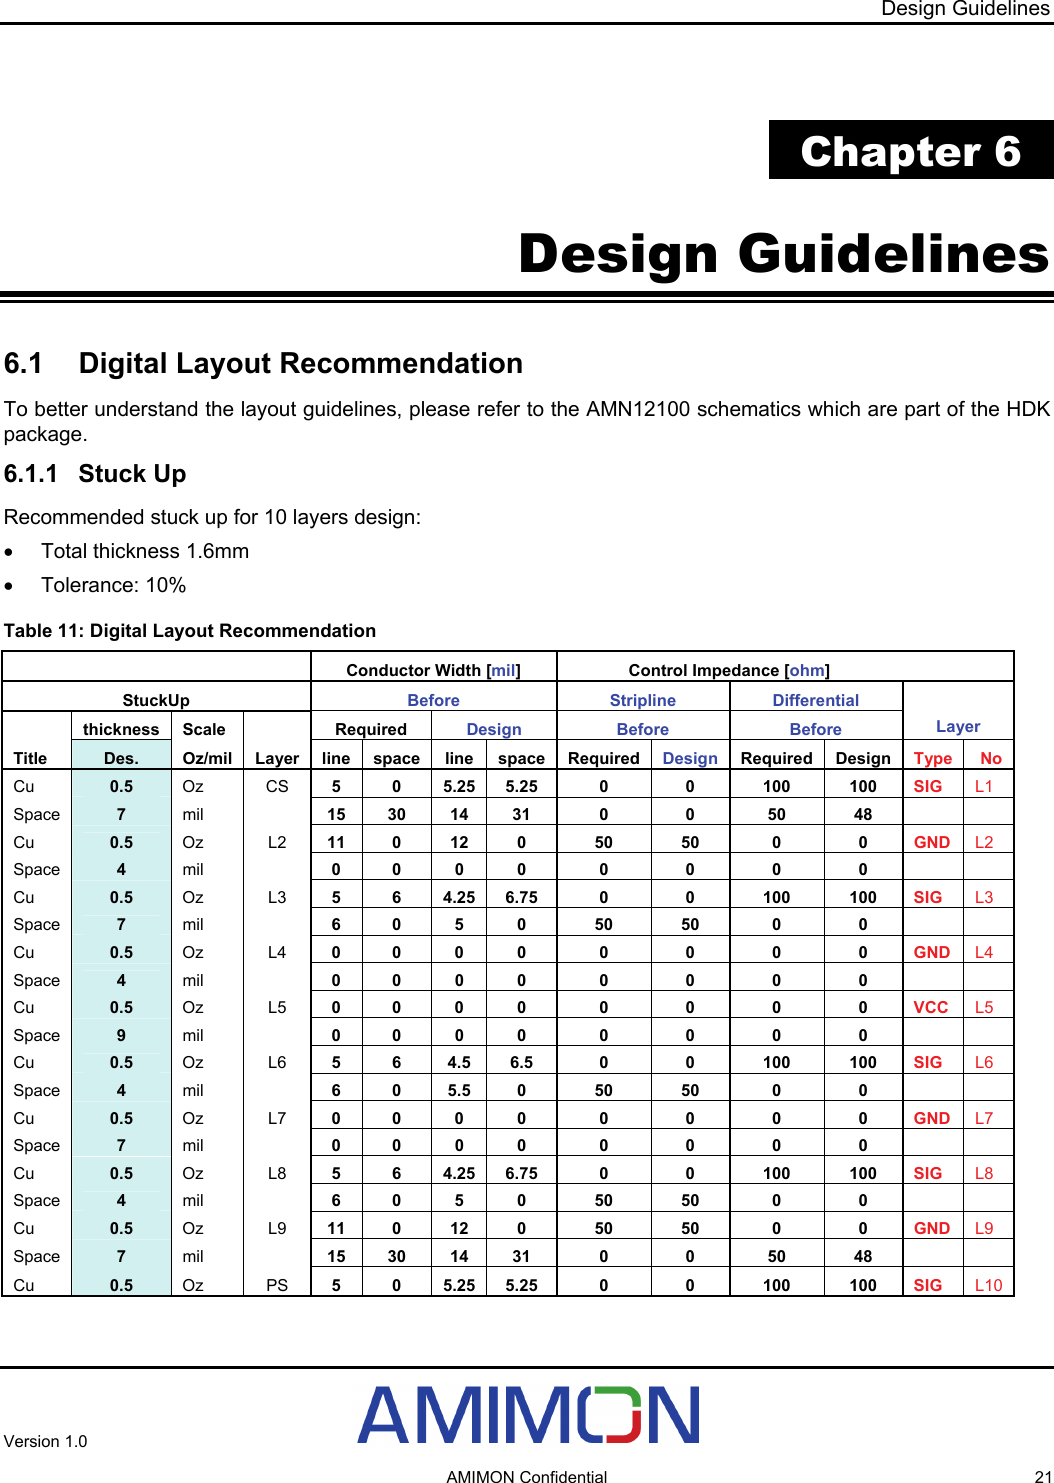 Design Guidelines  Chapter 6 Design Guidelines 6.1  Digital Layout Recommendation To better understand the layout guidelines, please refer to the AMN12100 schematics which are part of the HDK package. 6.1.1 Stuck Up Recommended stuck up for 10 layers design: •  Total thickness 1.6mm • Tolerance: 10% Table 11: Digital Layout Recommendation    Conductor Width [mil]  Control Impedance [ohm]       StuckUp  Before Stripline  Differential    thickness  Scale     Required  Design Before  Before Layer Title  Des.  Oz/mil Layer line  space  line  space Required Design  Required Design Type  No Cu  0.5  Oz CS 5 0 5.25 5.25  0  0  100  100 SIG  L1 Space  7  mil   15 30 14 31  0  0  50  48      Cu  0.5  Oz L2 11 0  12  0  50  50  0  0 GND  L2 Space  4  mil   0 0 0 0 0 0 0 0      Cu  0.5  Oz L3 5 6 4.25 6.75  0  0  100  100 SIG  L3 Space  7  mil   6 0  5  0  50  50  0  0      Cu  0.5  Oz L4 0 0 0 0 0 0 0 0 GND  L4 Space  4  mil    0 0 0 0 0 0 0 0      Cu  0.5  Oz L5 0 0 0 0 0 0 0 0 VCC  L5 Space  9  mil    0 0 0 0 0 0 0 0      Cu  0.5  Oz L6 5 6 4.5 6.5  0  0  100  100 SIG  L6 Space  4  mil   6  0 5.5 0  50  50  0  0      Cu  0.5  Oz L7 0 0 0 0 0 0 0 0 GND  L7 Space  7  mil   0 0 0 0 0 0 0 0      Cu  0.5  Oz L8 5 6 4.25 6.75  0  0  100  100 SIG  L8 Space  4  mil    6 0  5 0  50  50  0  0      Cu  0.5  Oz L9 11 0  12  0  50  50  0  0 GND  L9 Space  7  mil    15 30  14  31  0  0  50  48      Cu  0.5  Oz PS 5 0 5.25 5.25  0  0  100  100 SIG  L10 Version 1.0     AMIMON Confidential  21 